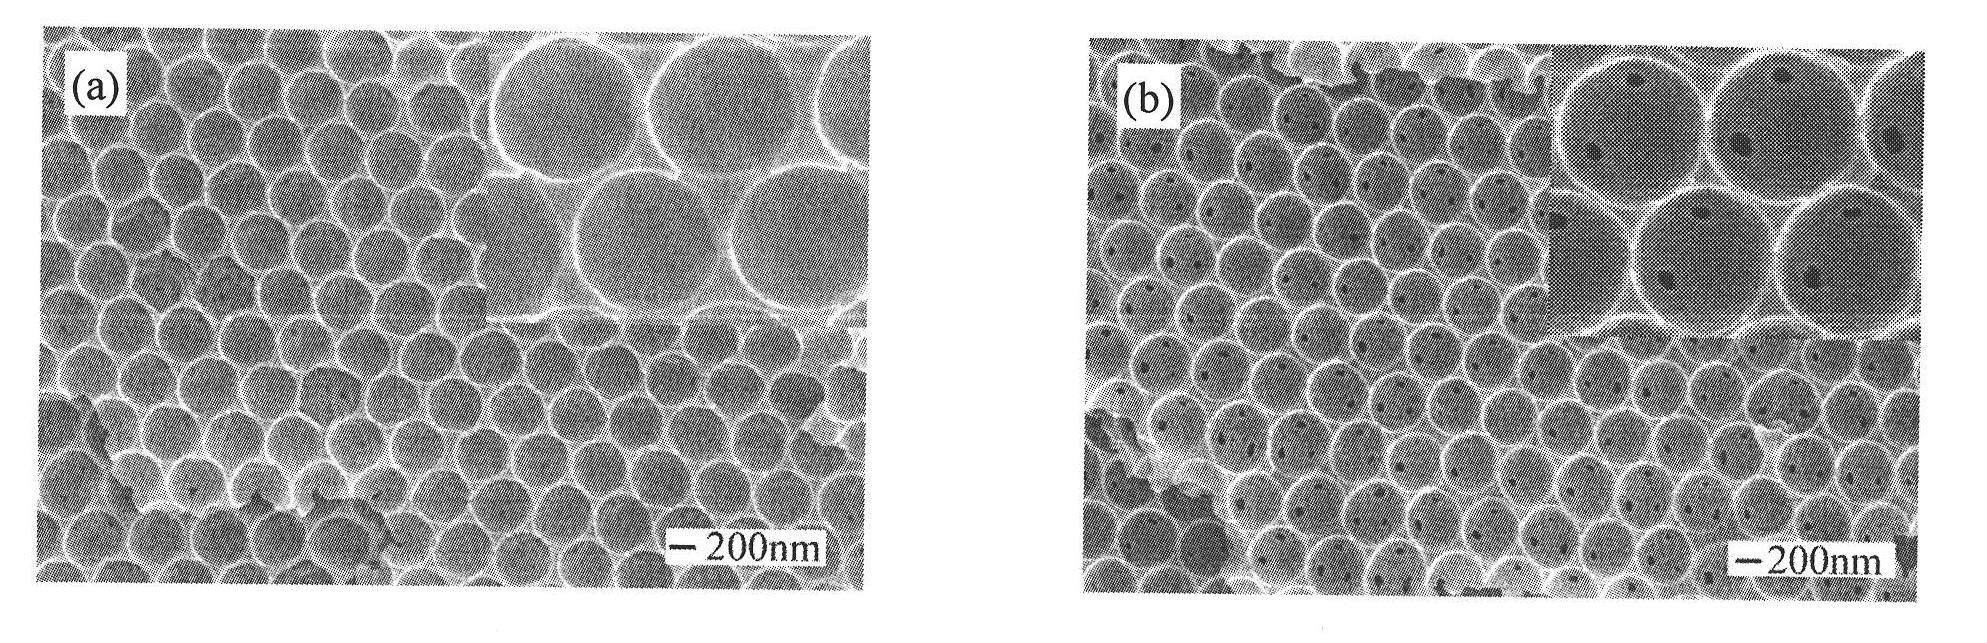 Temperature-responsive three-dimensional ordered macroporous controlled-release material